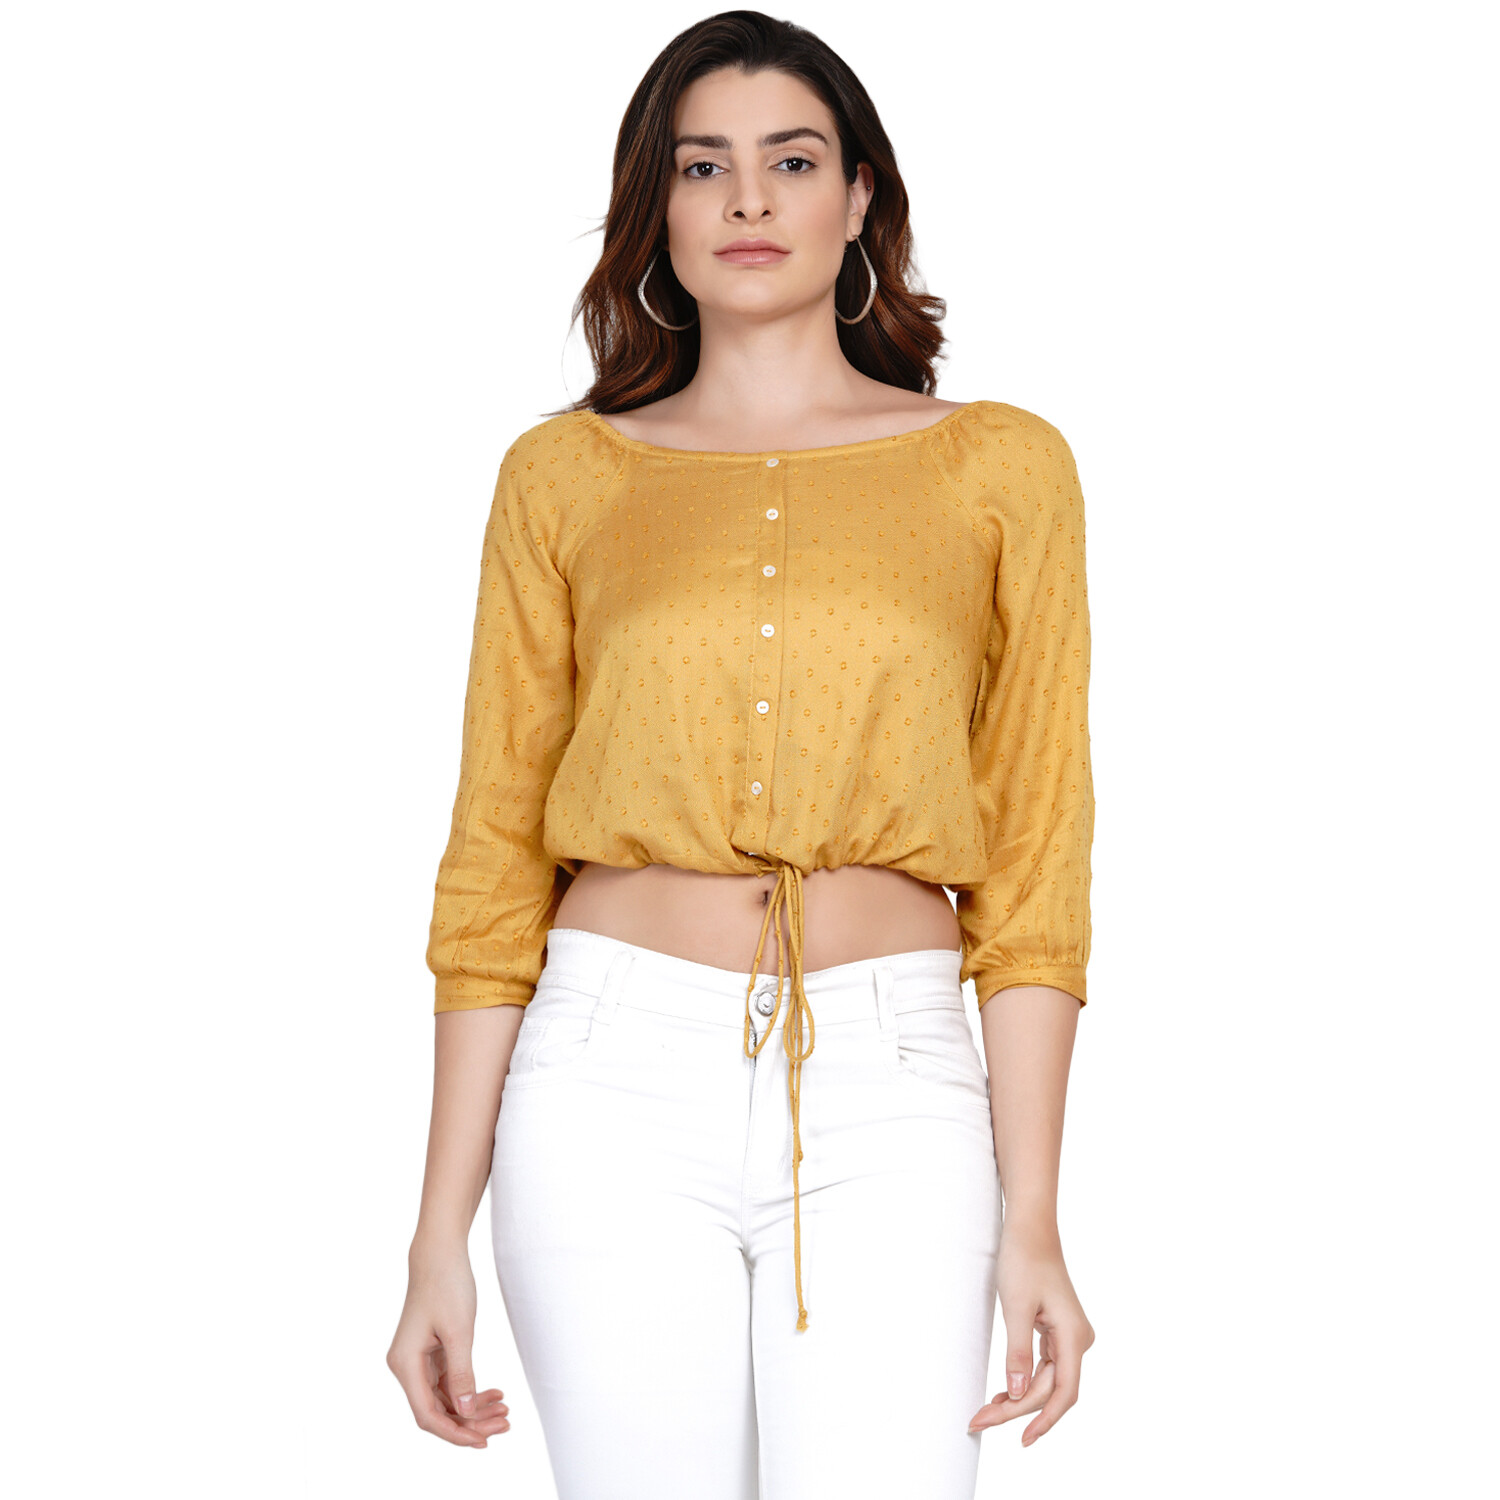 Top in Rayon Swiss Dobby Textured Crop fit